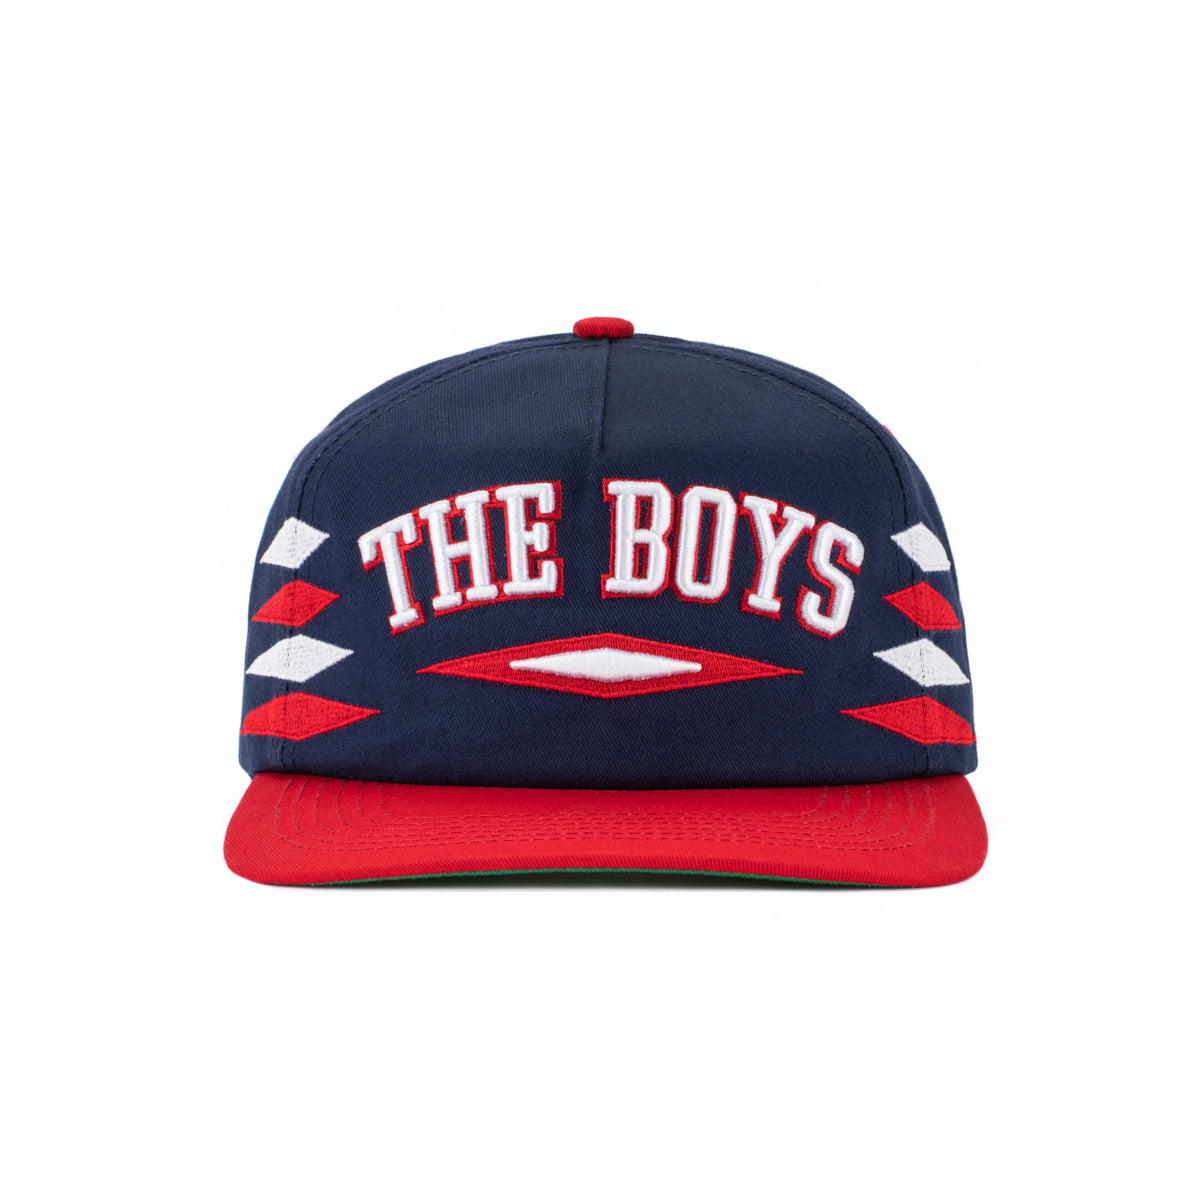 The Boys Diamond Retro Hat-Hats-Bussin With The Boys-Navy/Red-Barstool Sports